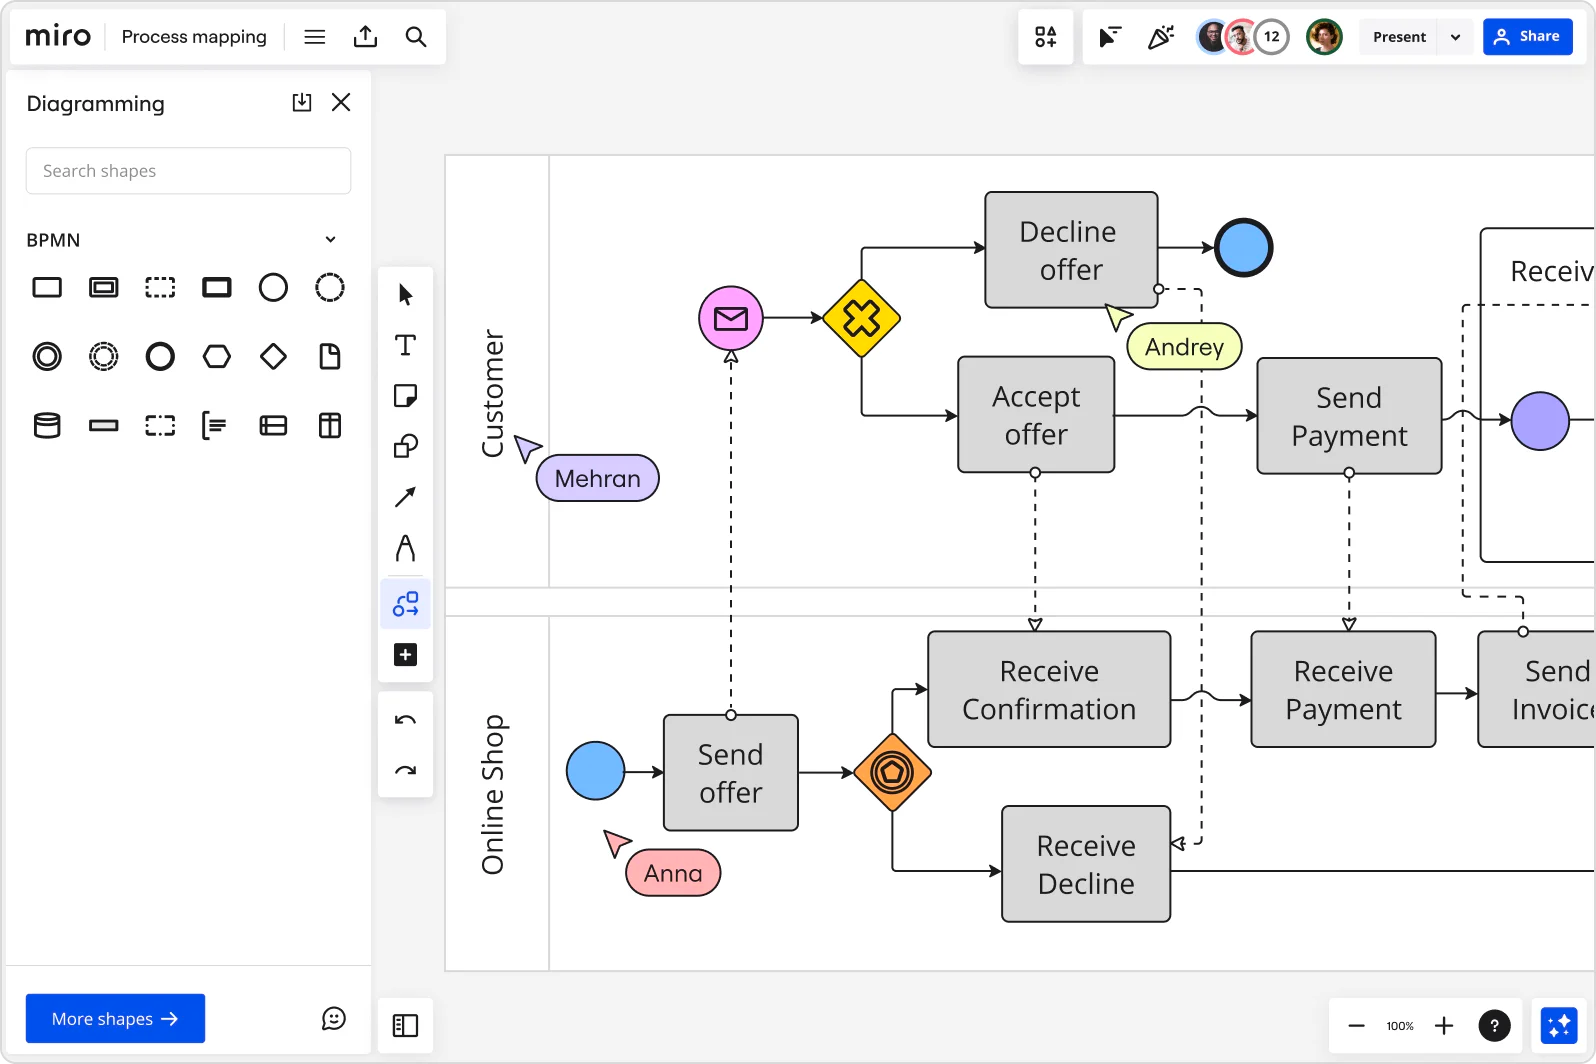 A visual map of retail processes created using the collaborative digital tool, Miro.